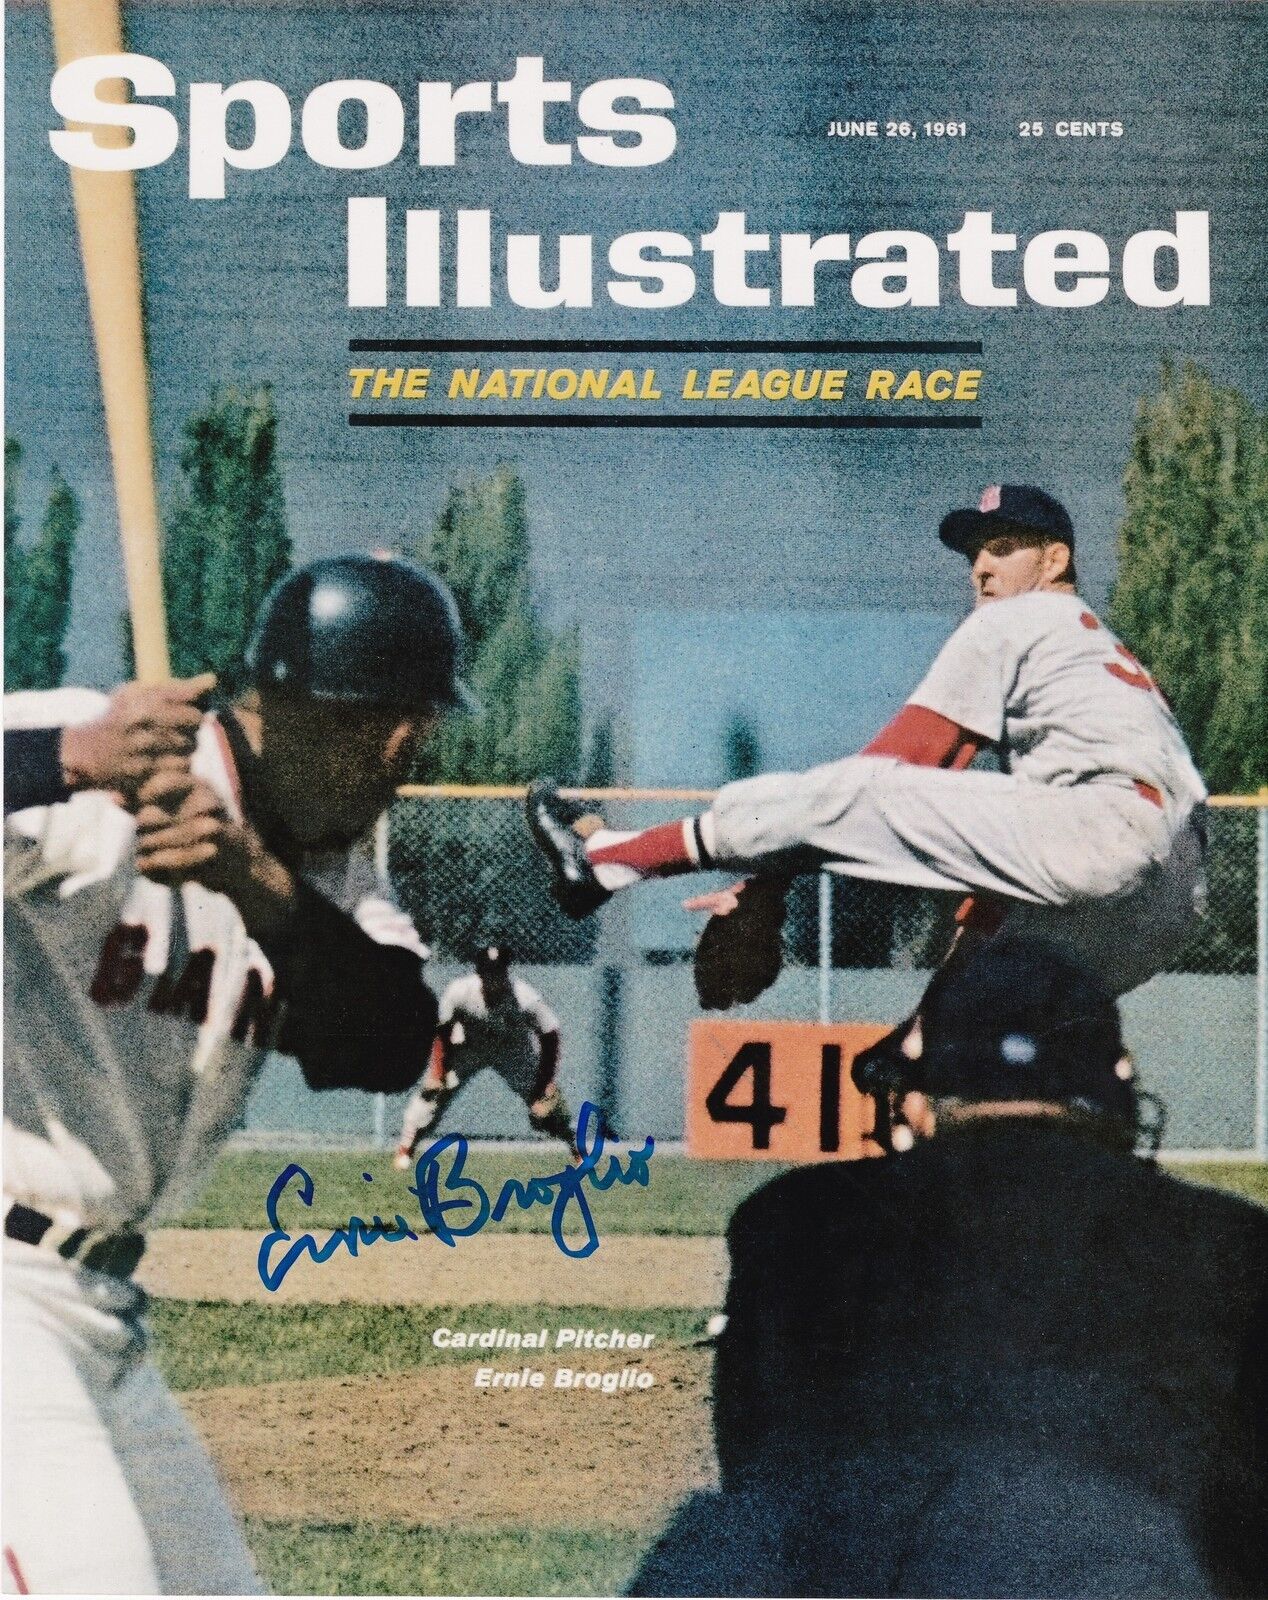 ERNIE BROGLIO ST. LOUIS CARDINALS SPORTS ILLUSTRATED COVER SIGNED 8x10